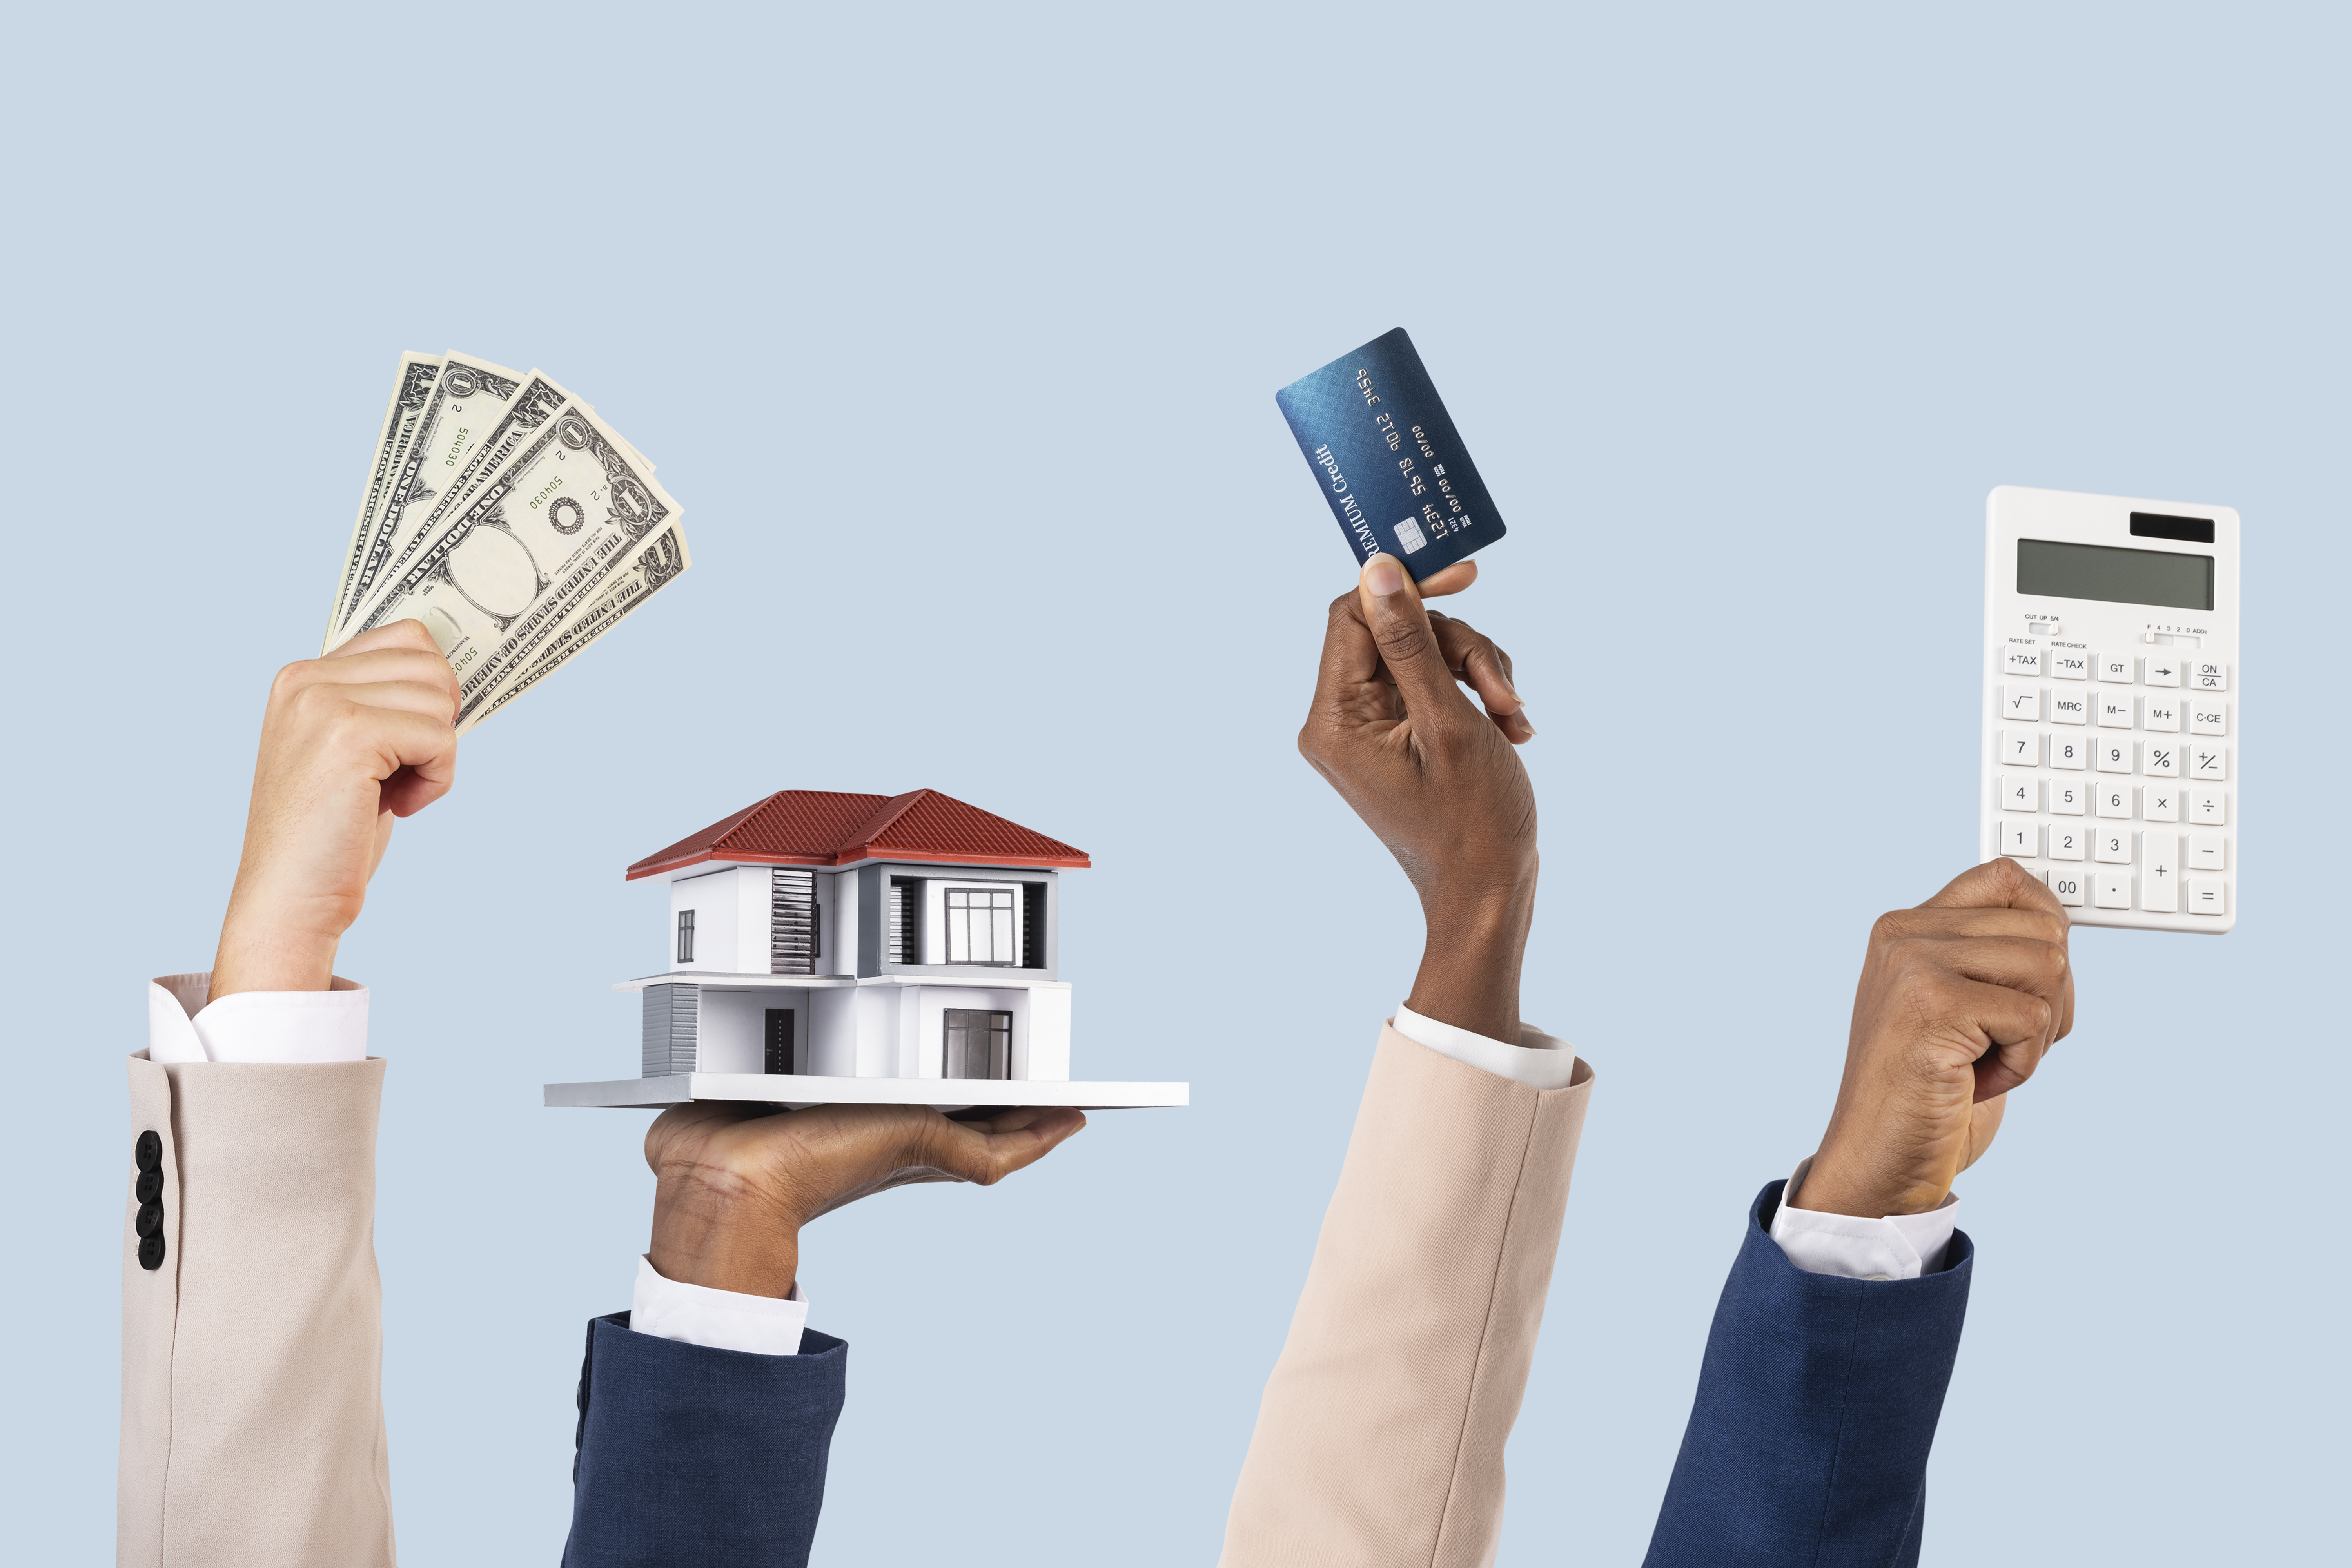 Graphic of hands holding money, a model house, a credit card, and a calculator